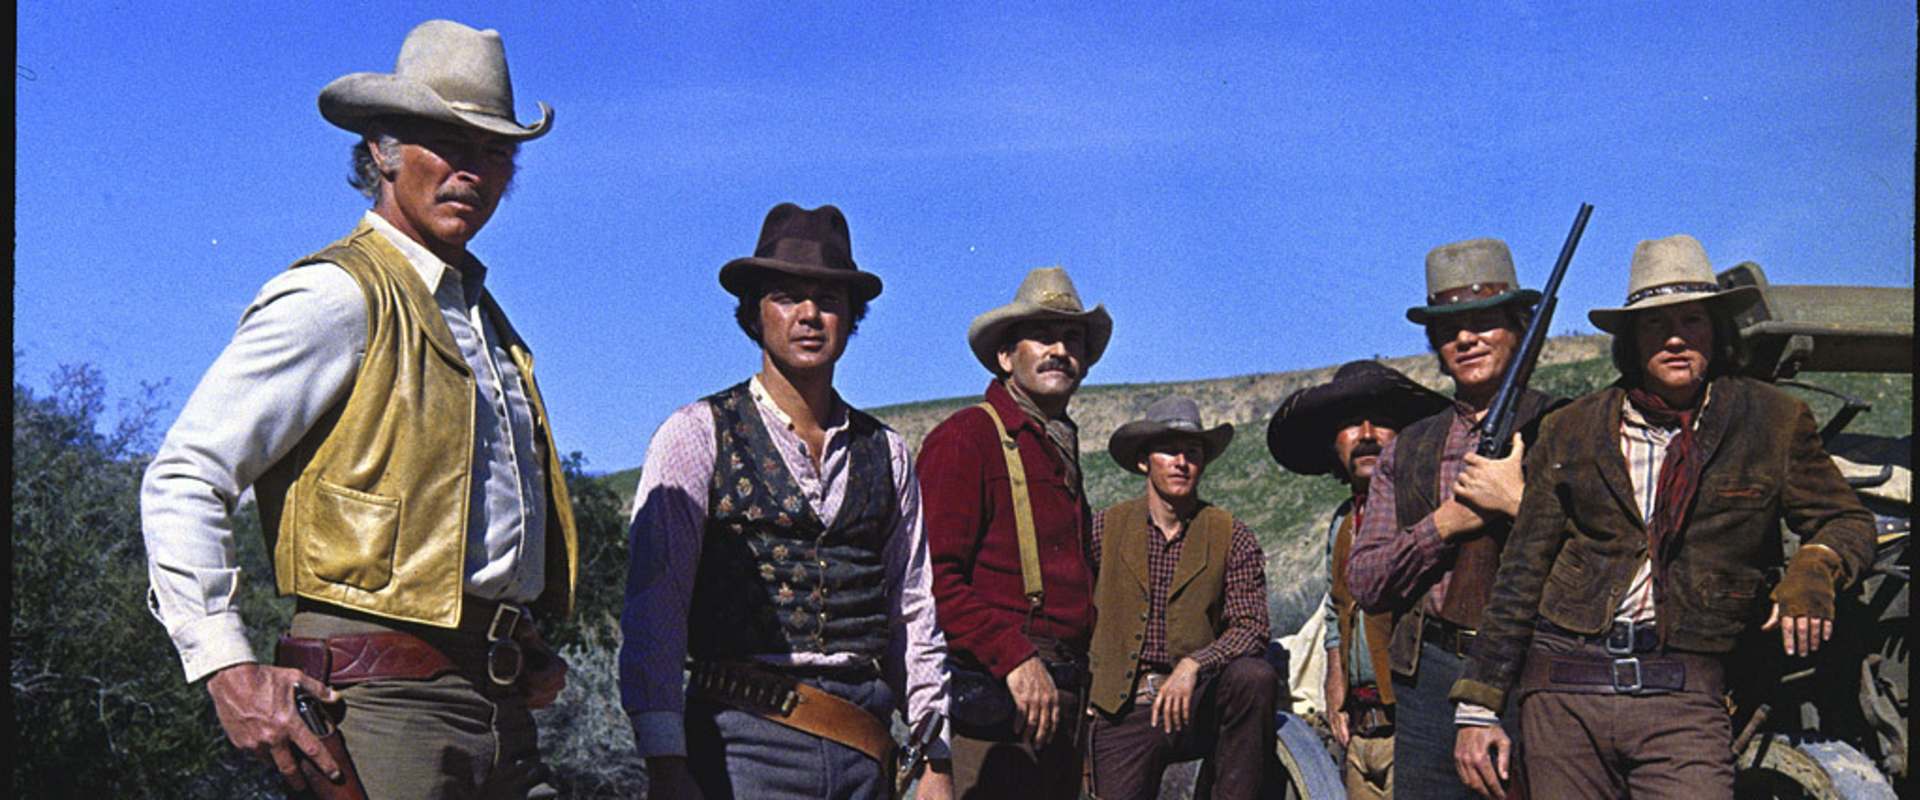 The Magnificent Seven Ride! background 2